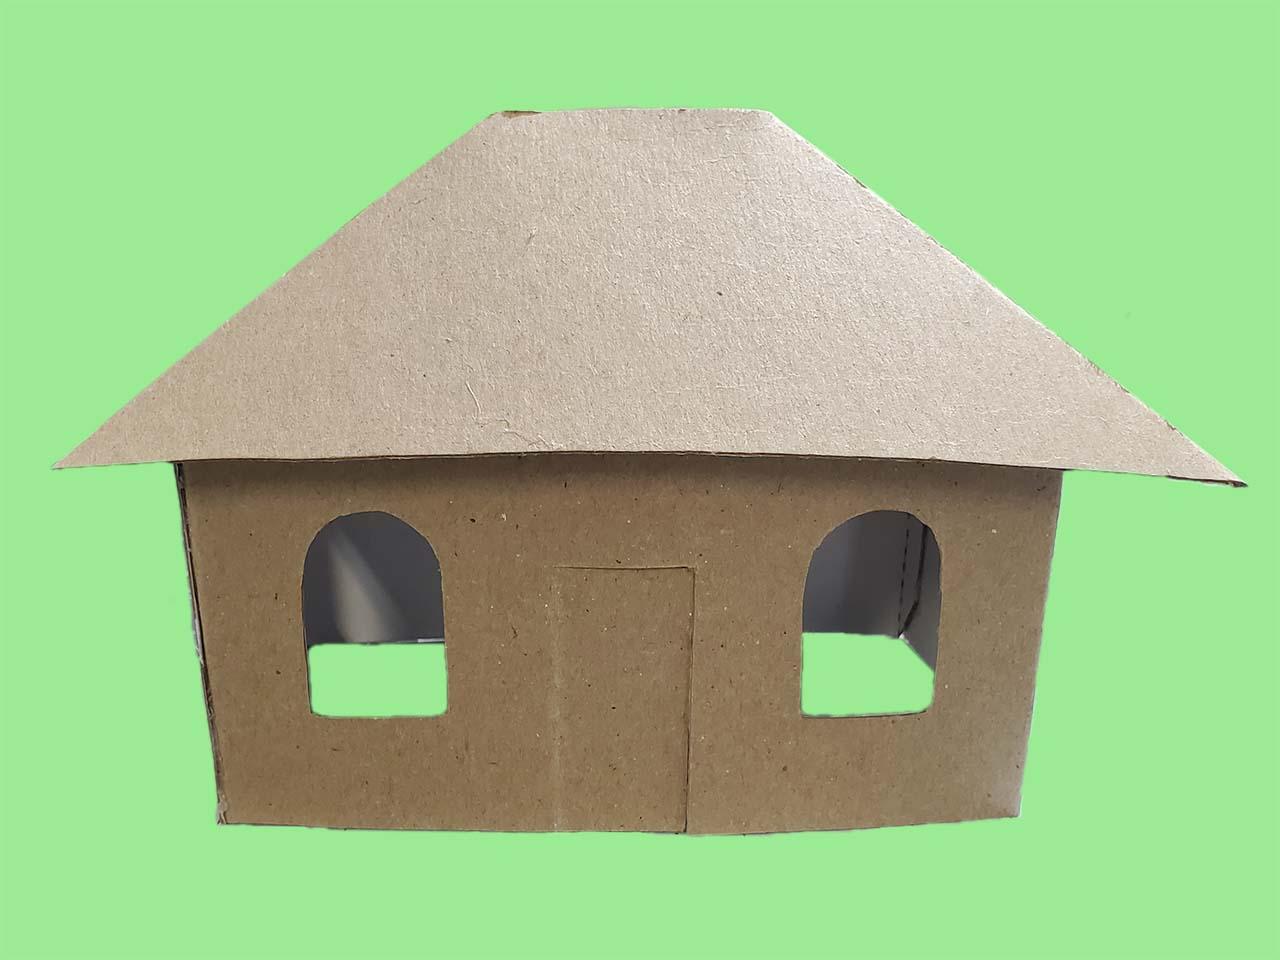 completed cardboard house